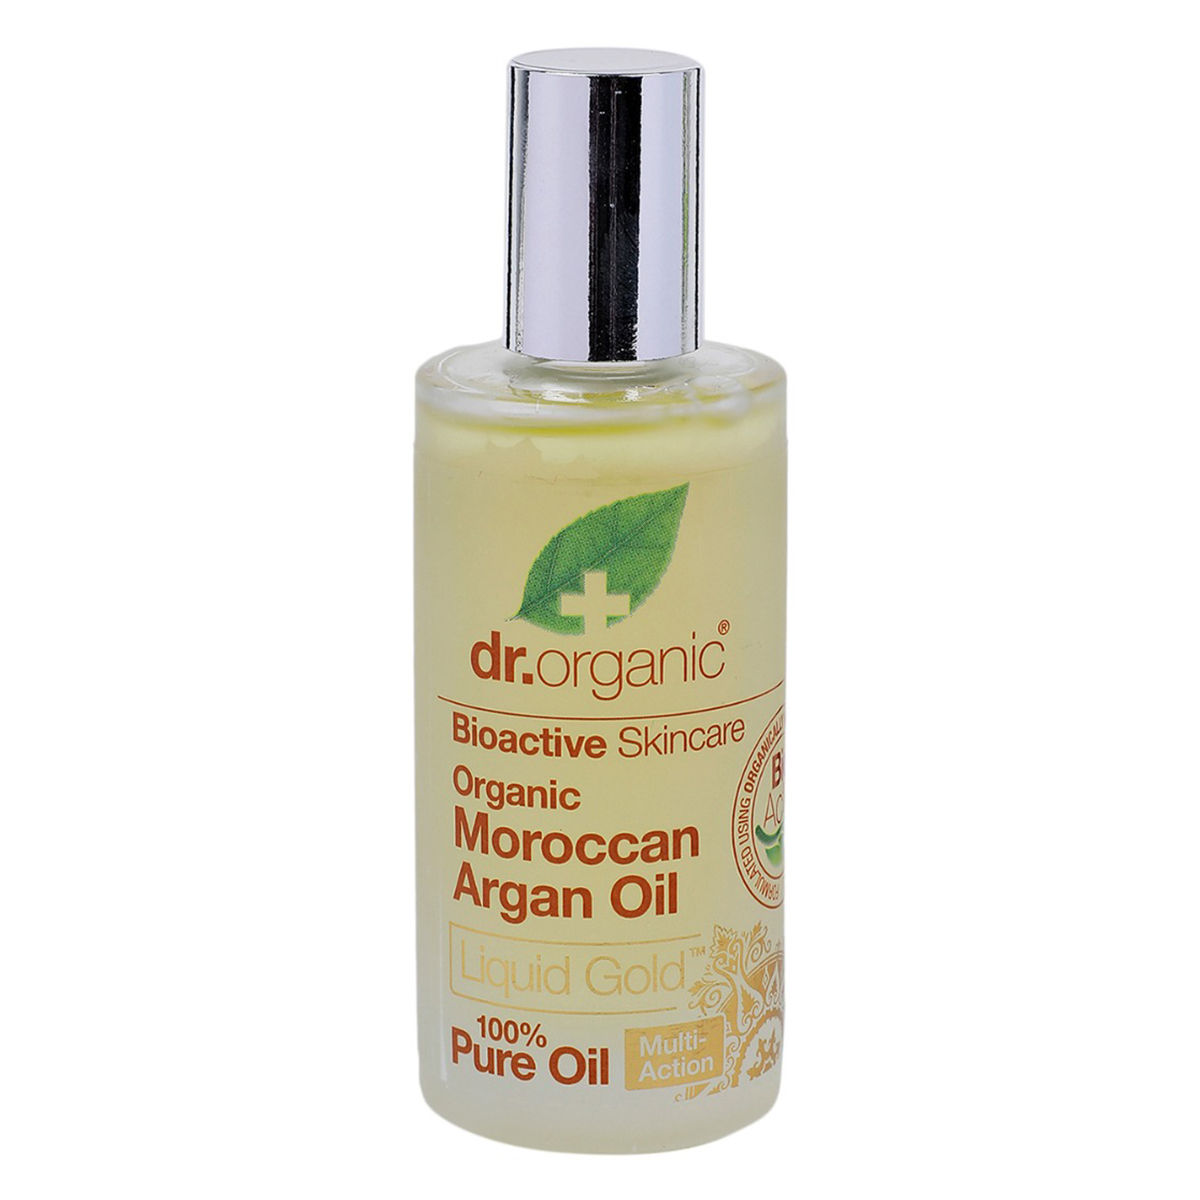 Dr Organic Moroccan Argan Oil Ml Price Uses Side Effects